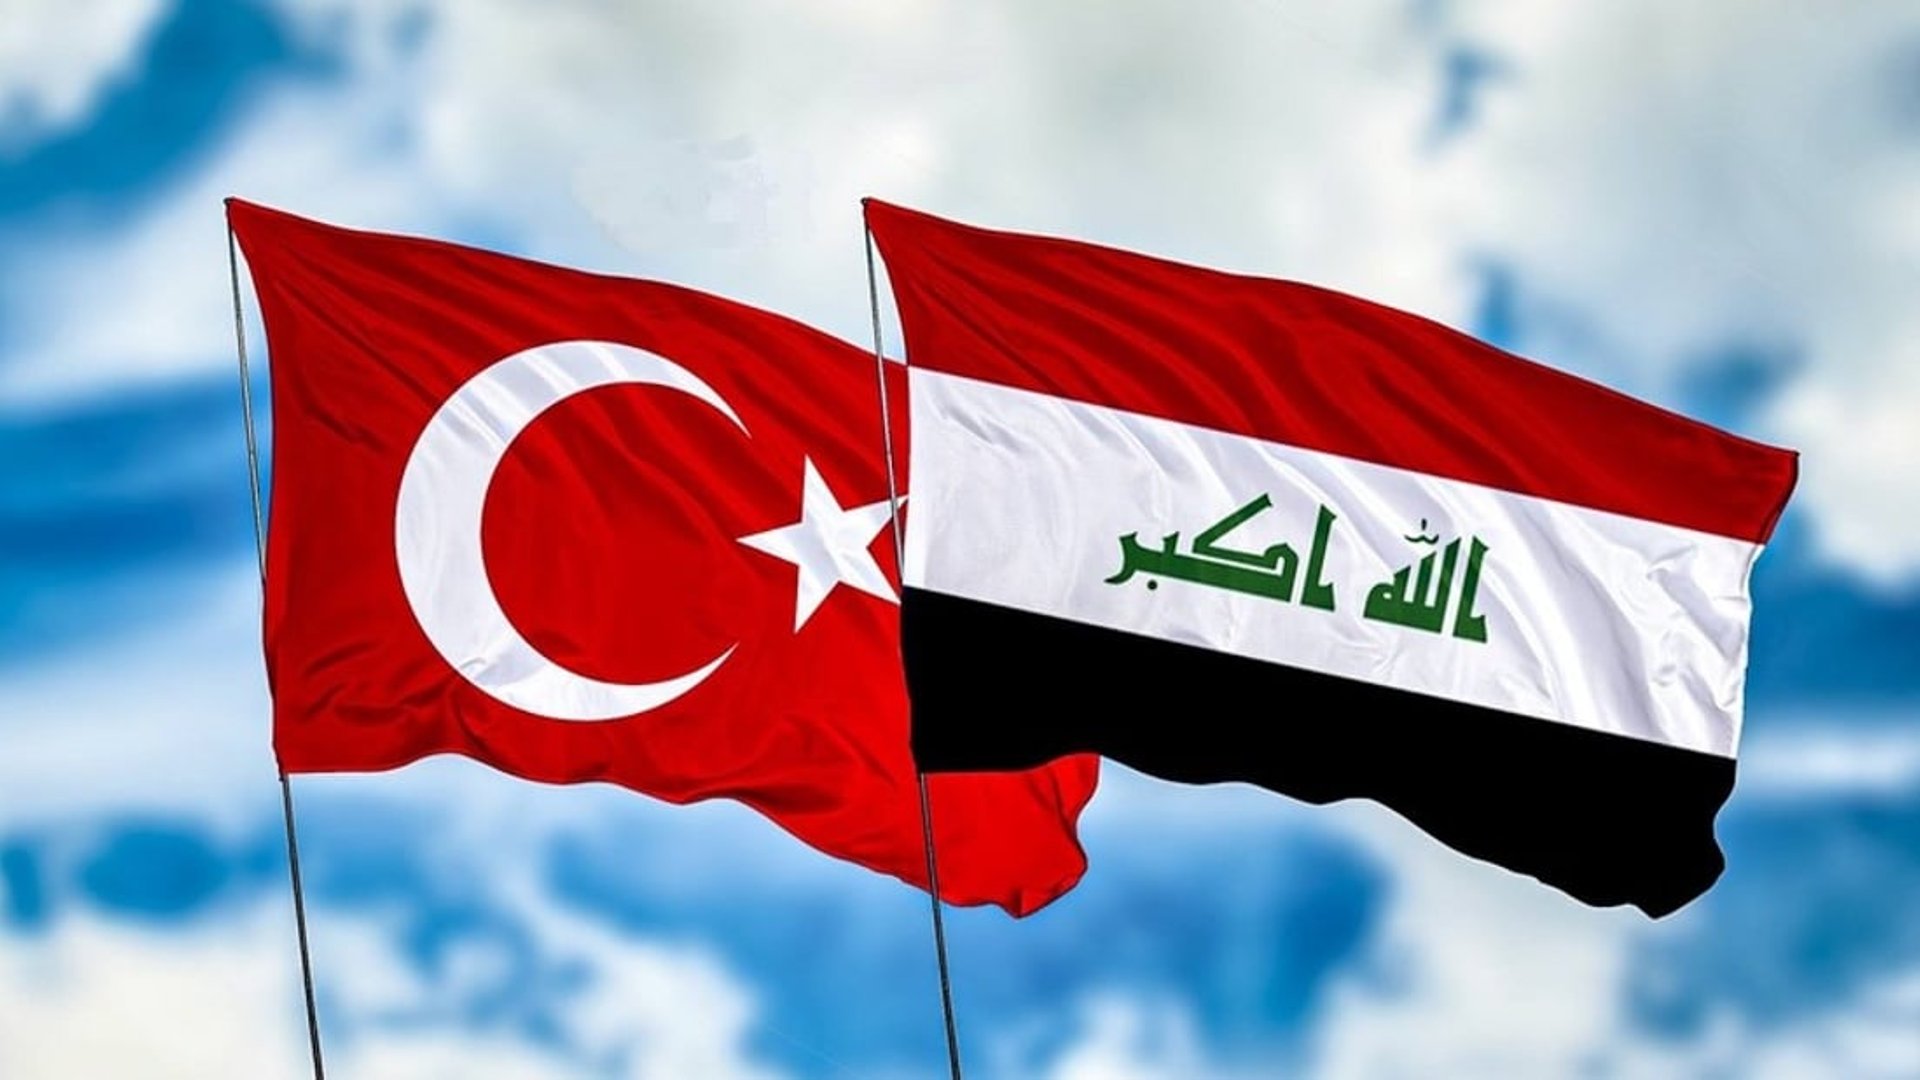 Iraq and Turkey expected to sign key trade agreements during Erdogans visit